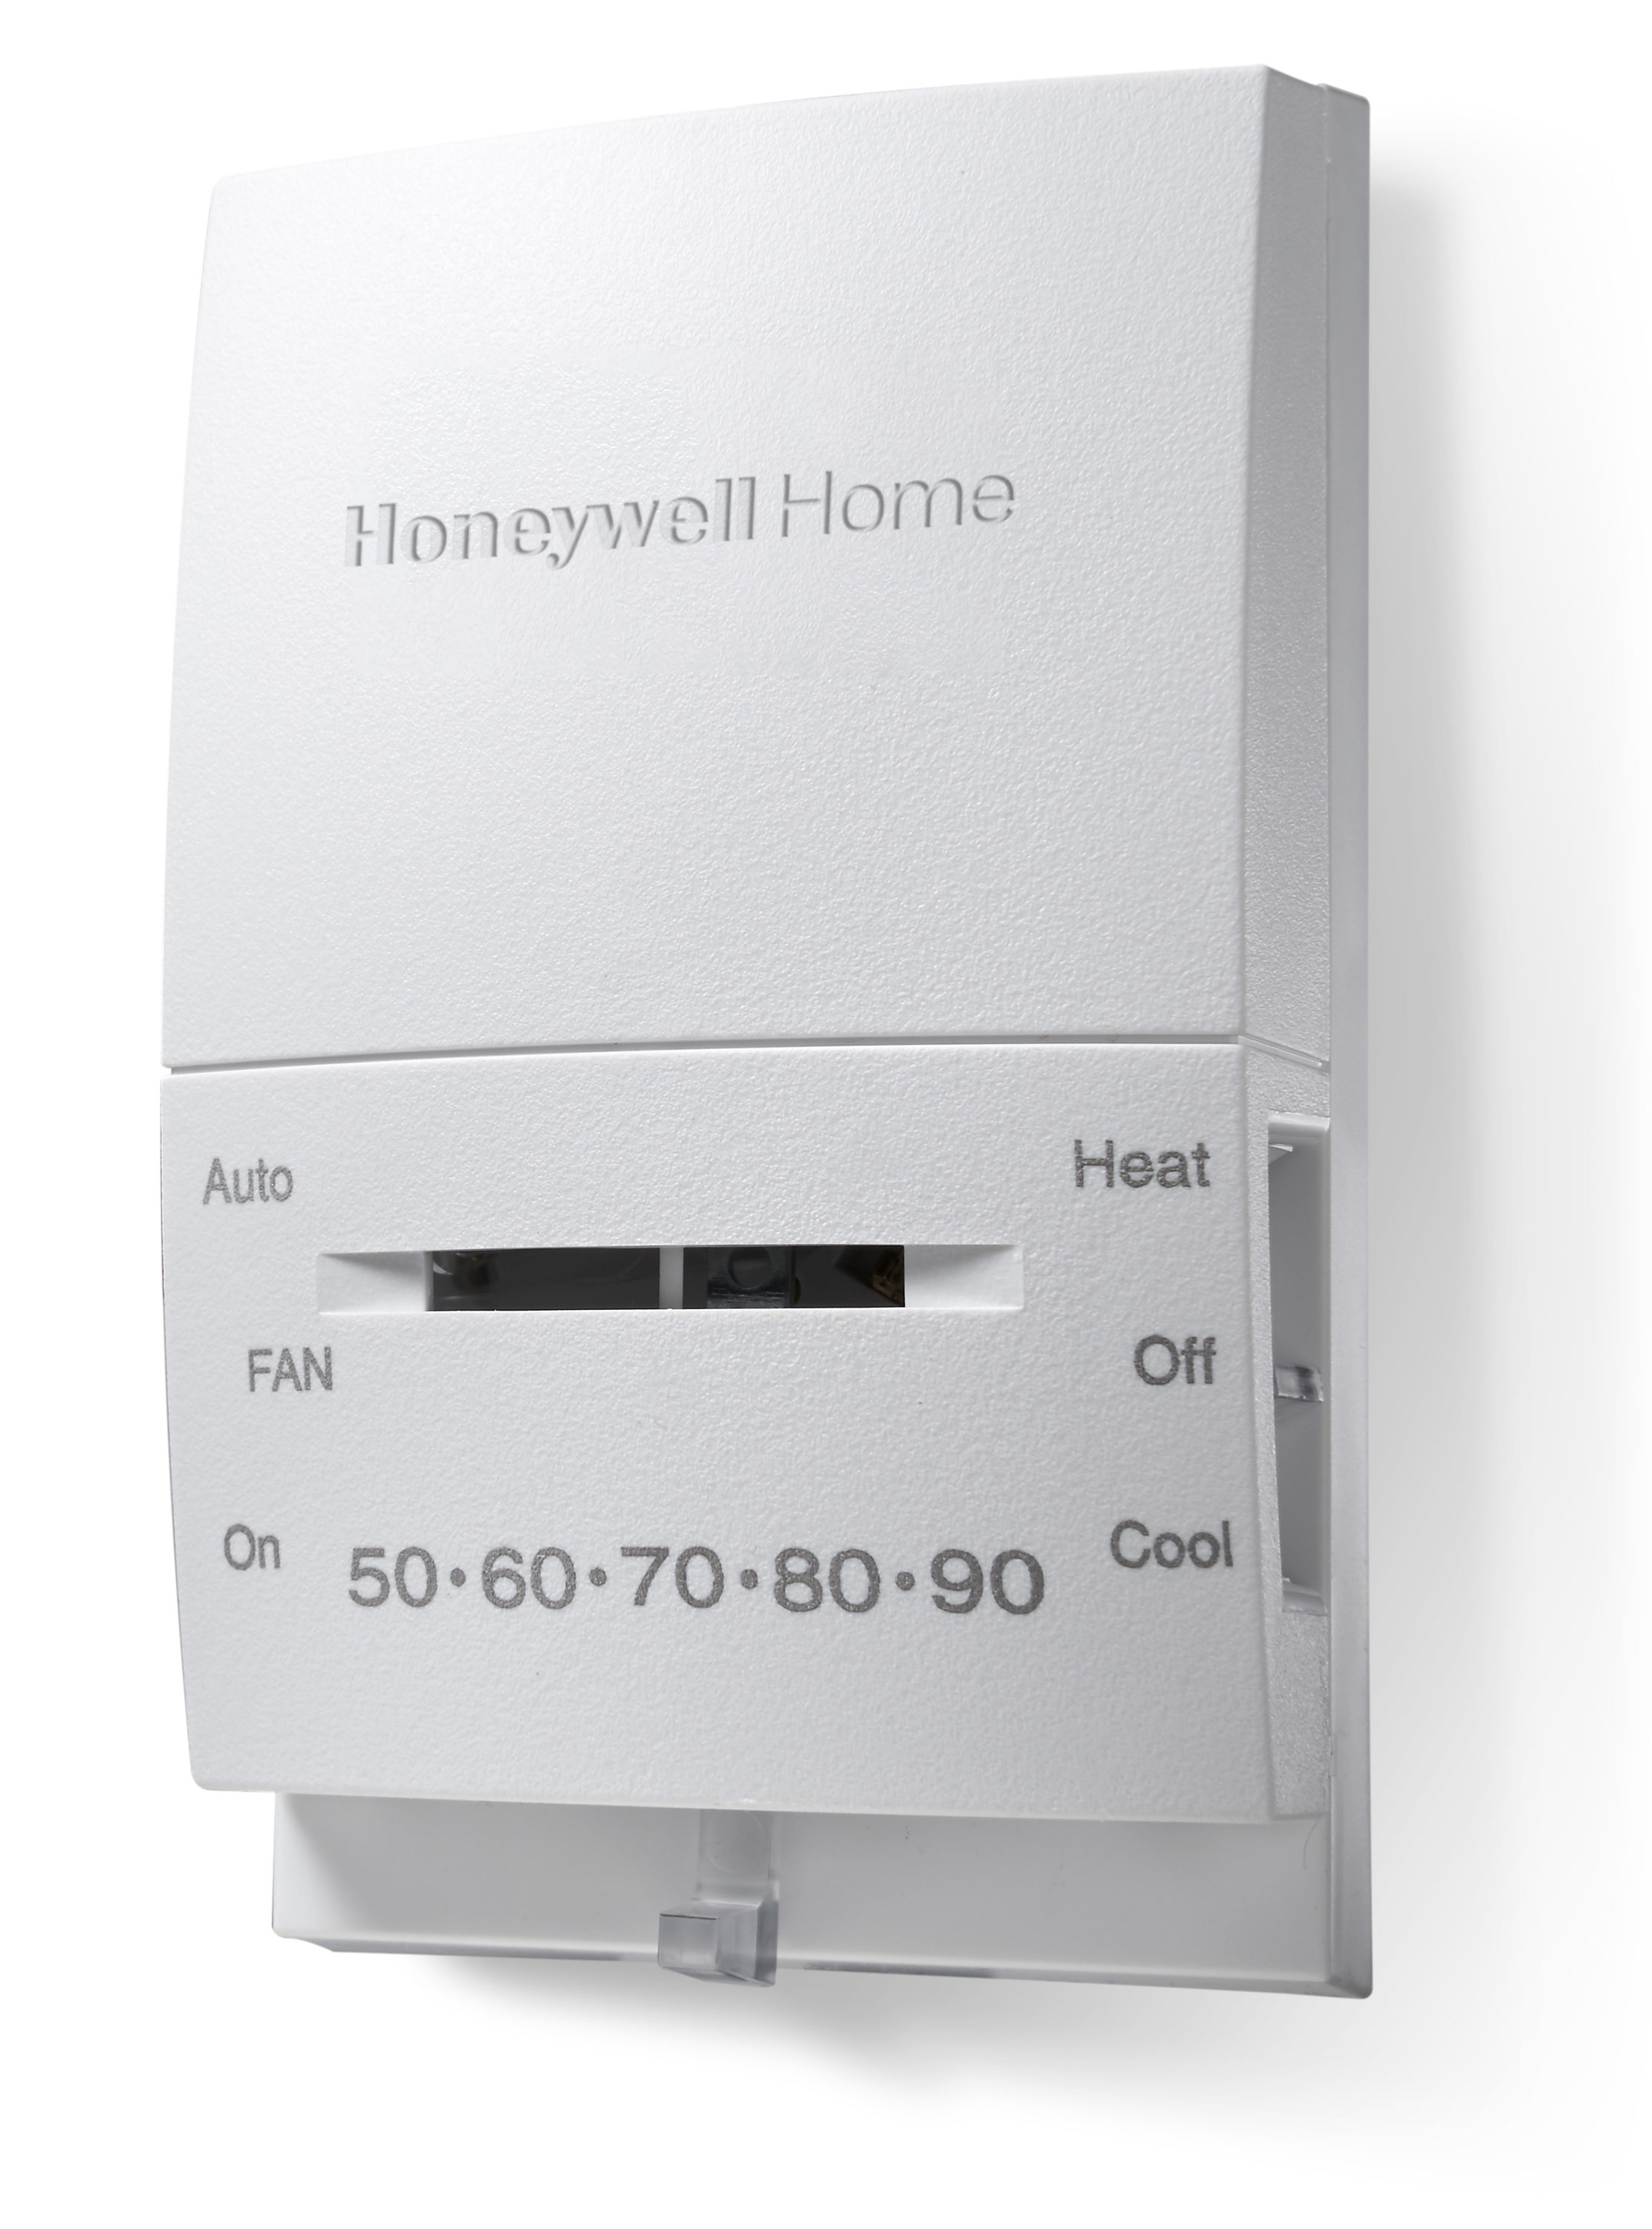 Honeywell Home RTH2510B 24-Volt 7-day Programmable Thermostat